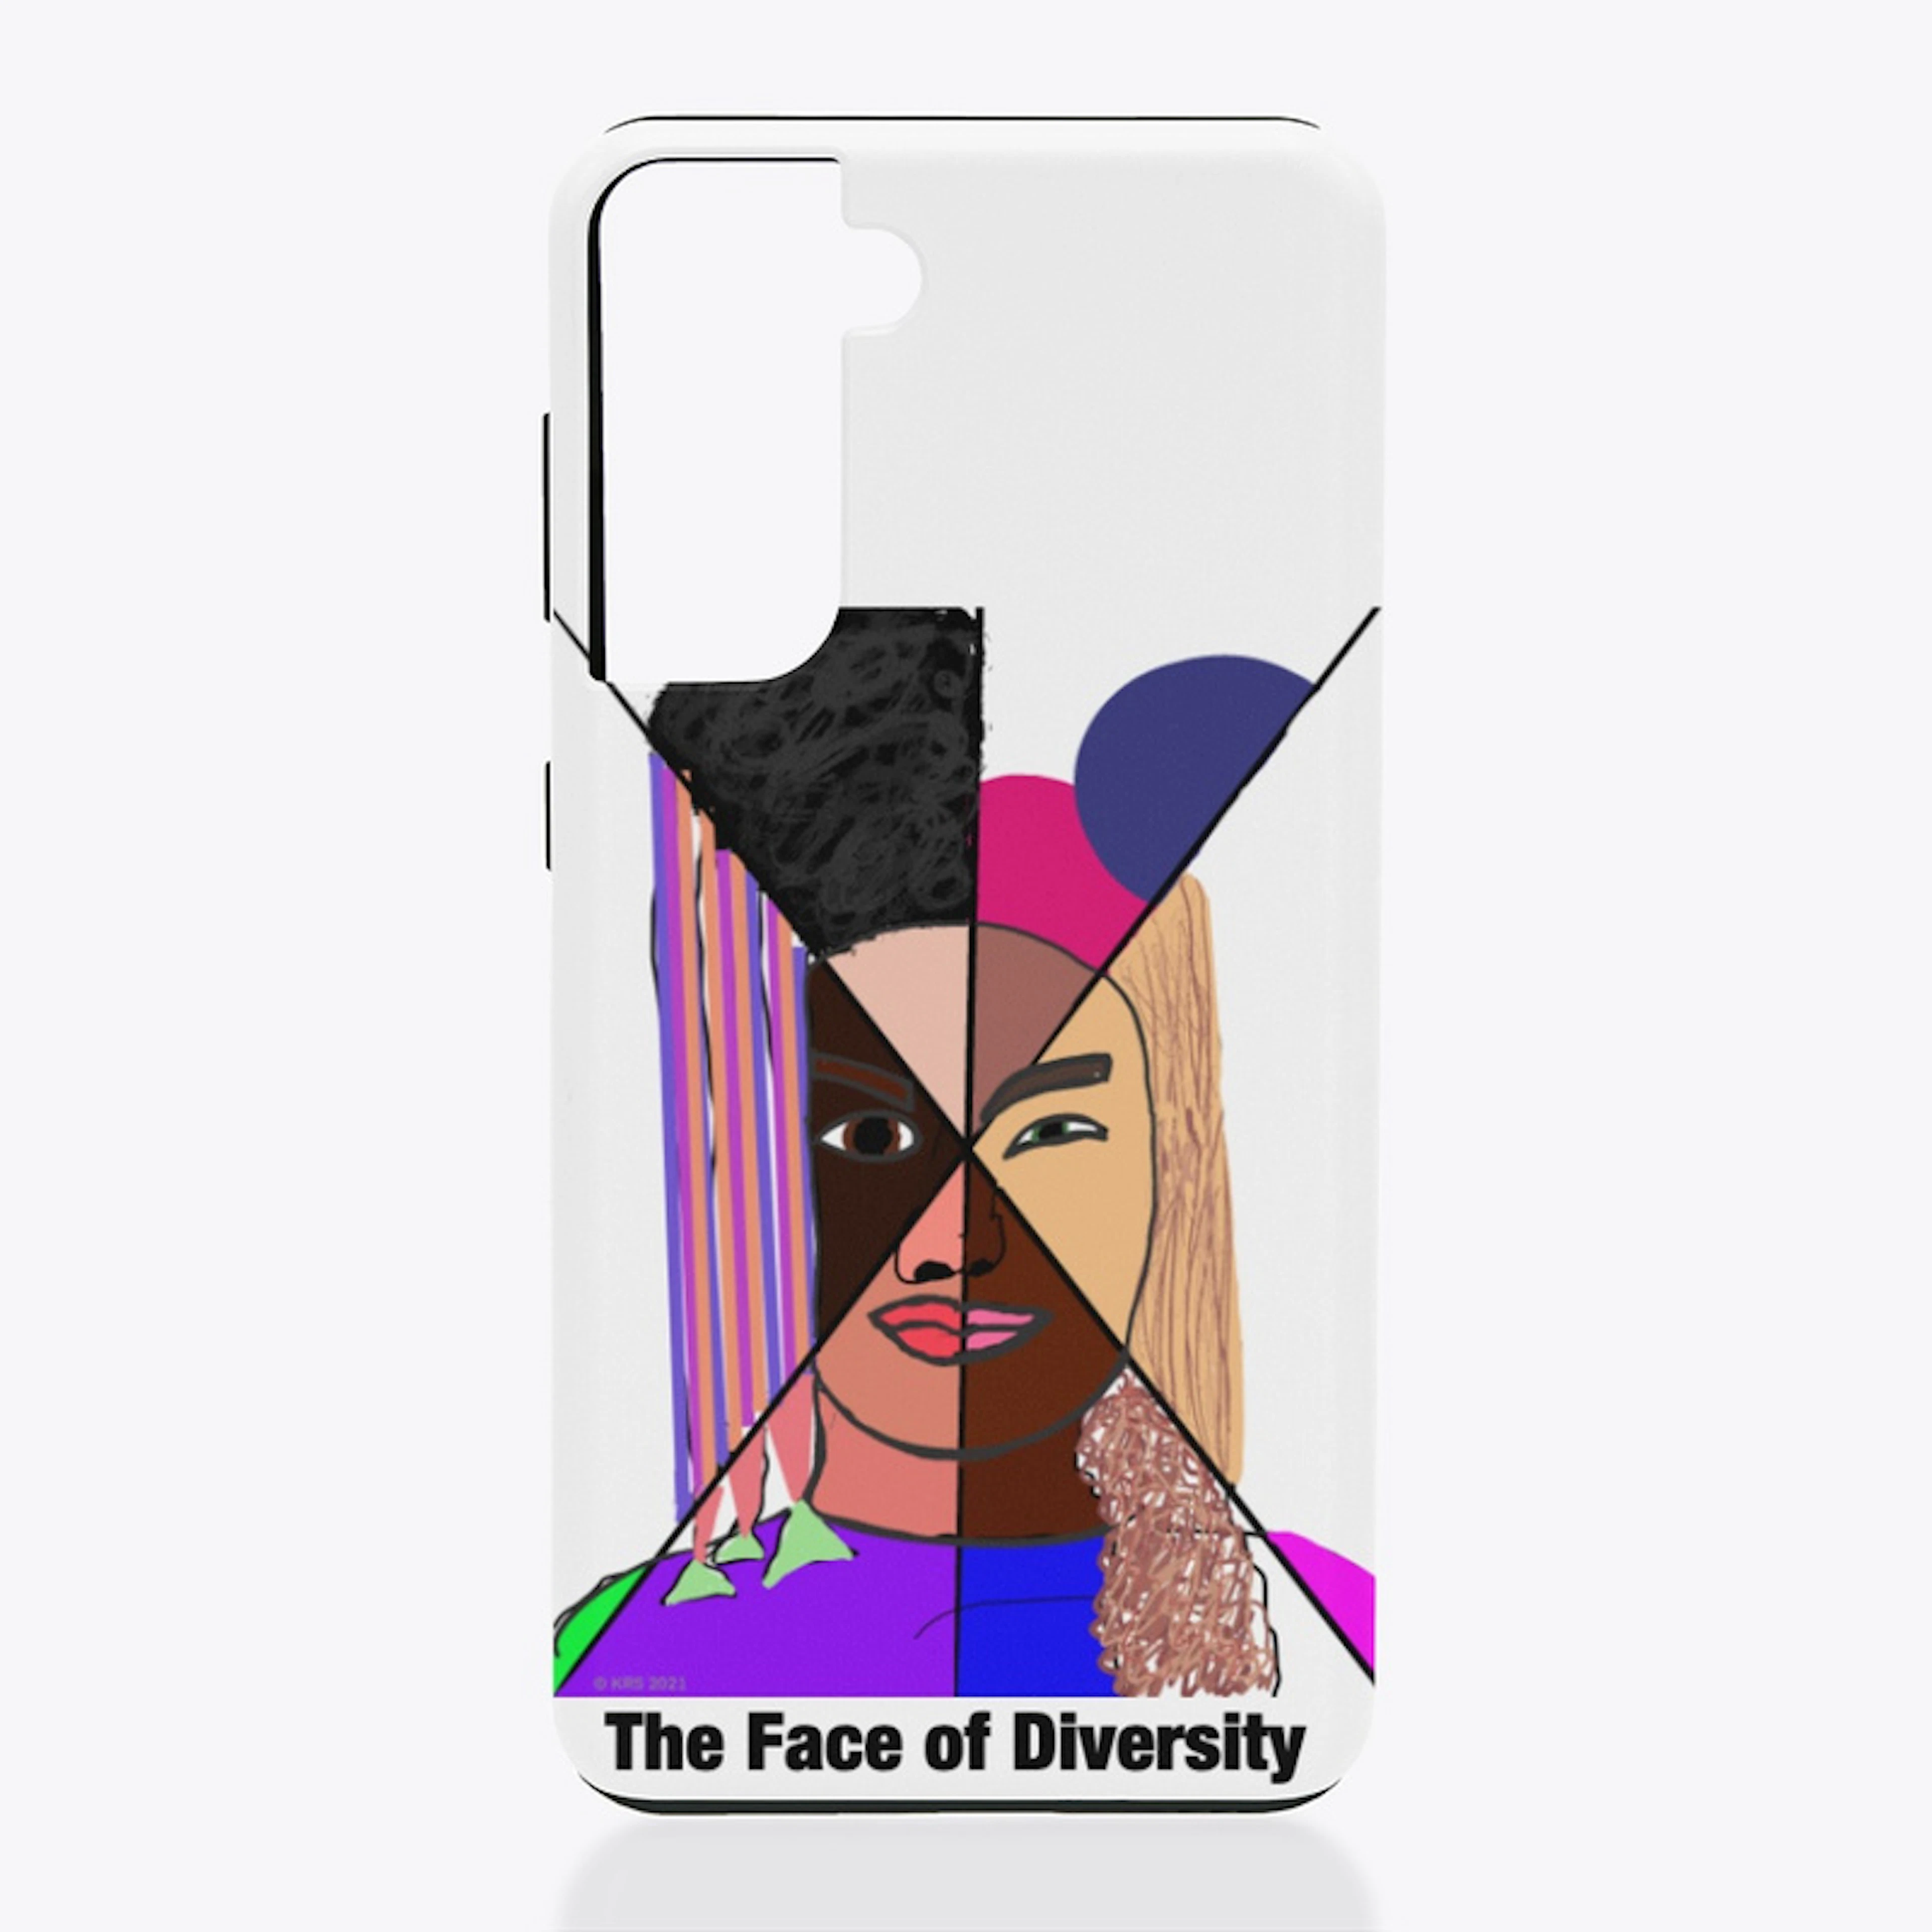 The Face of Diversity